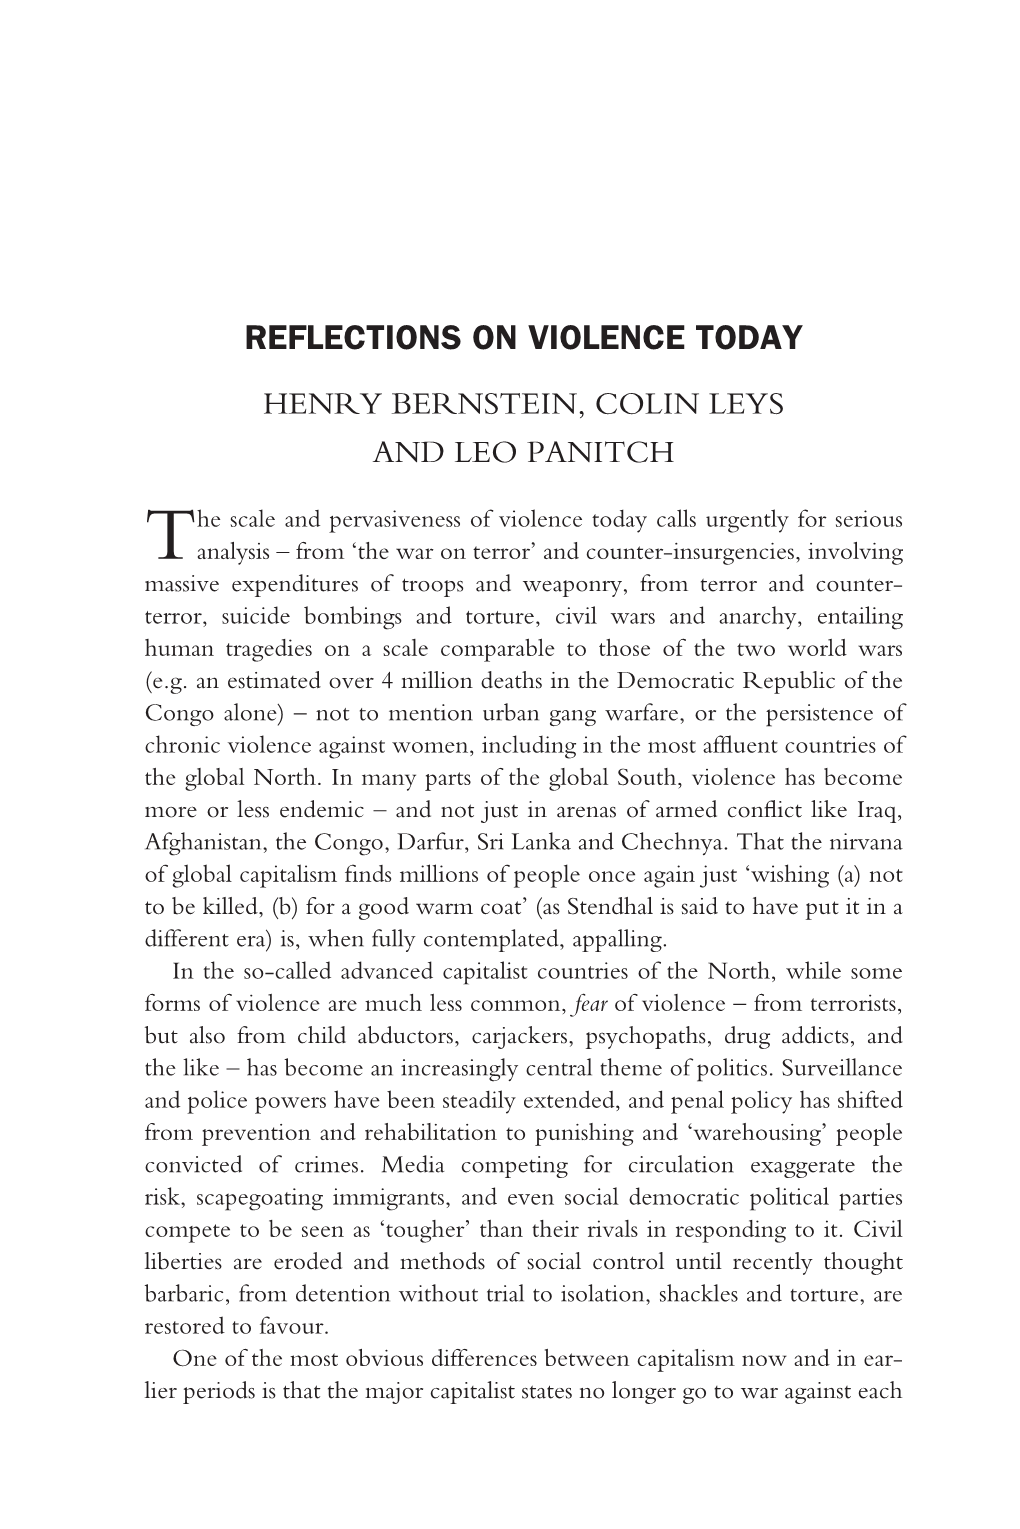 Reflections on Violence Today